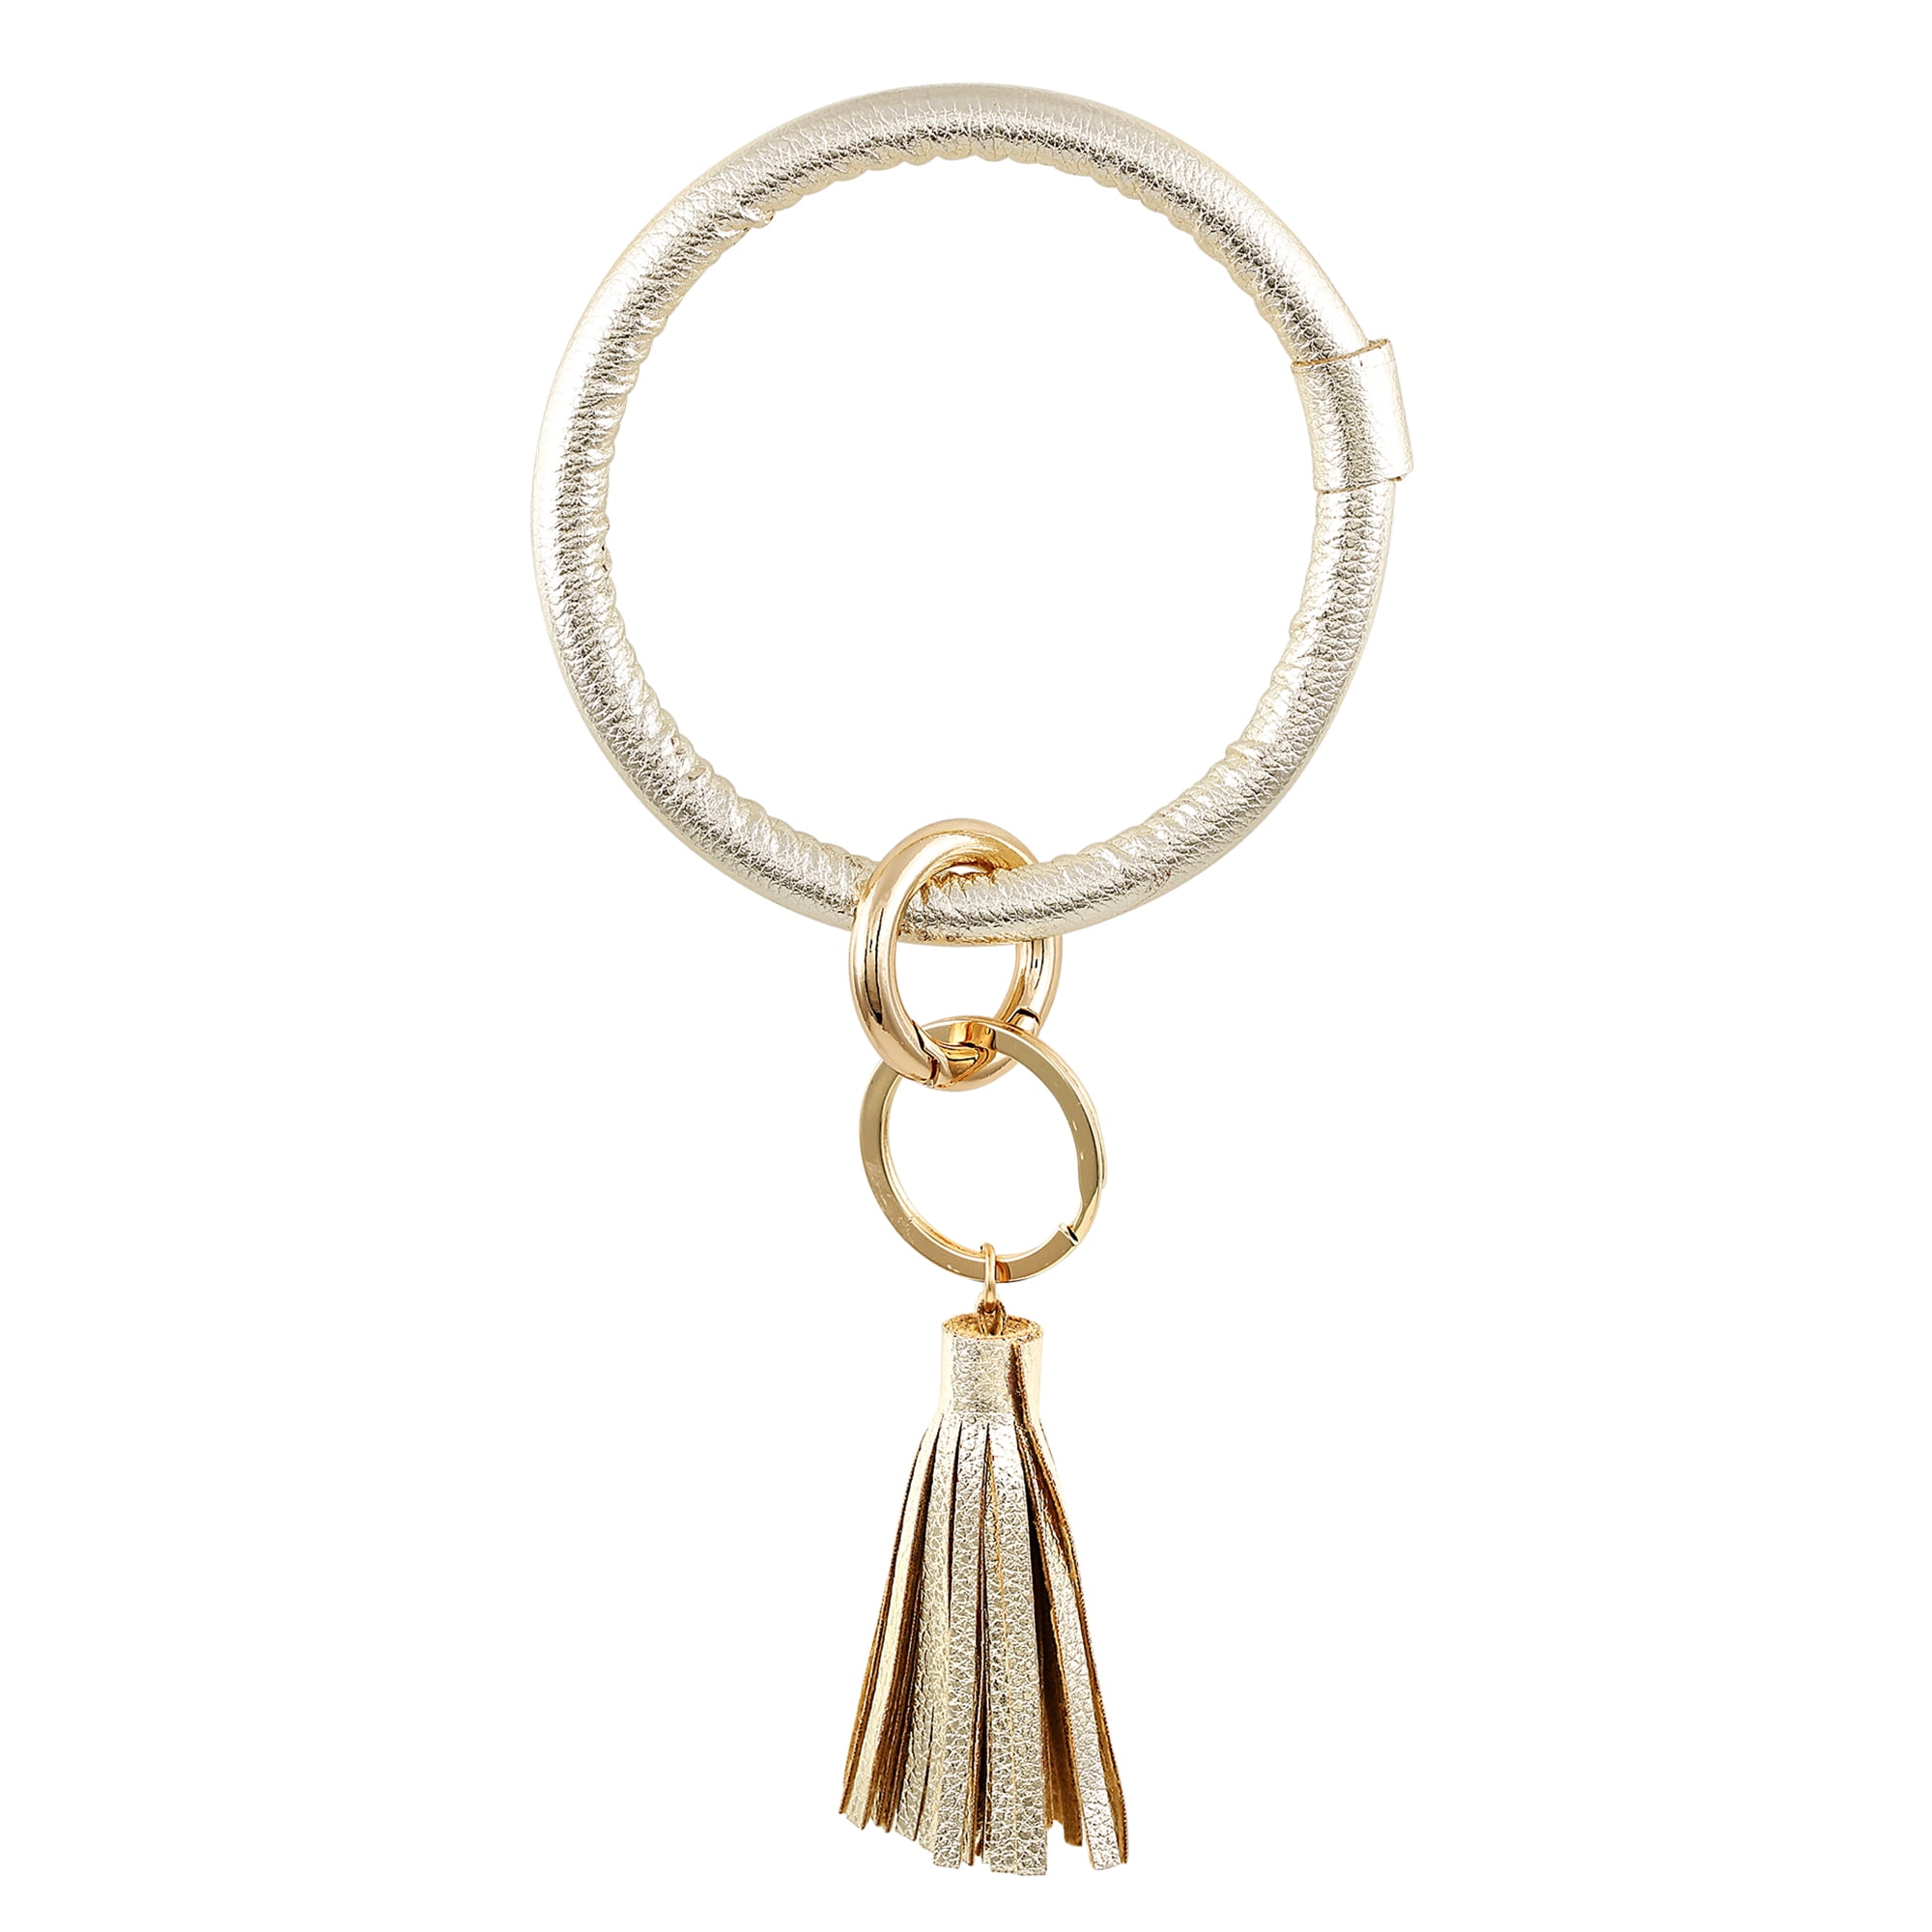 White K/Gold plated Zipper Pull Suede Tassels Purse Charm Bag Charm Jewelry Key Chain Gift Idea Purse Jewelry Rearview Mirror Charm